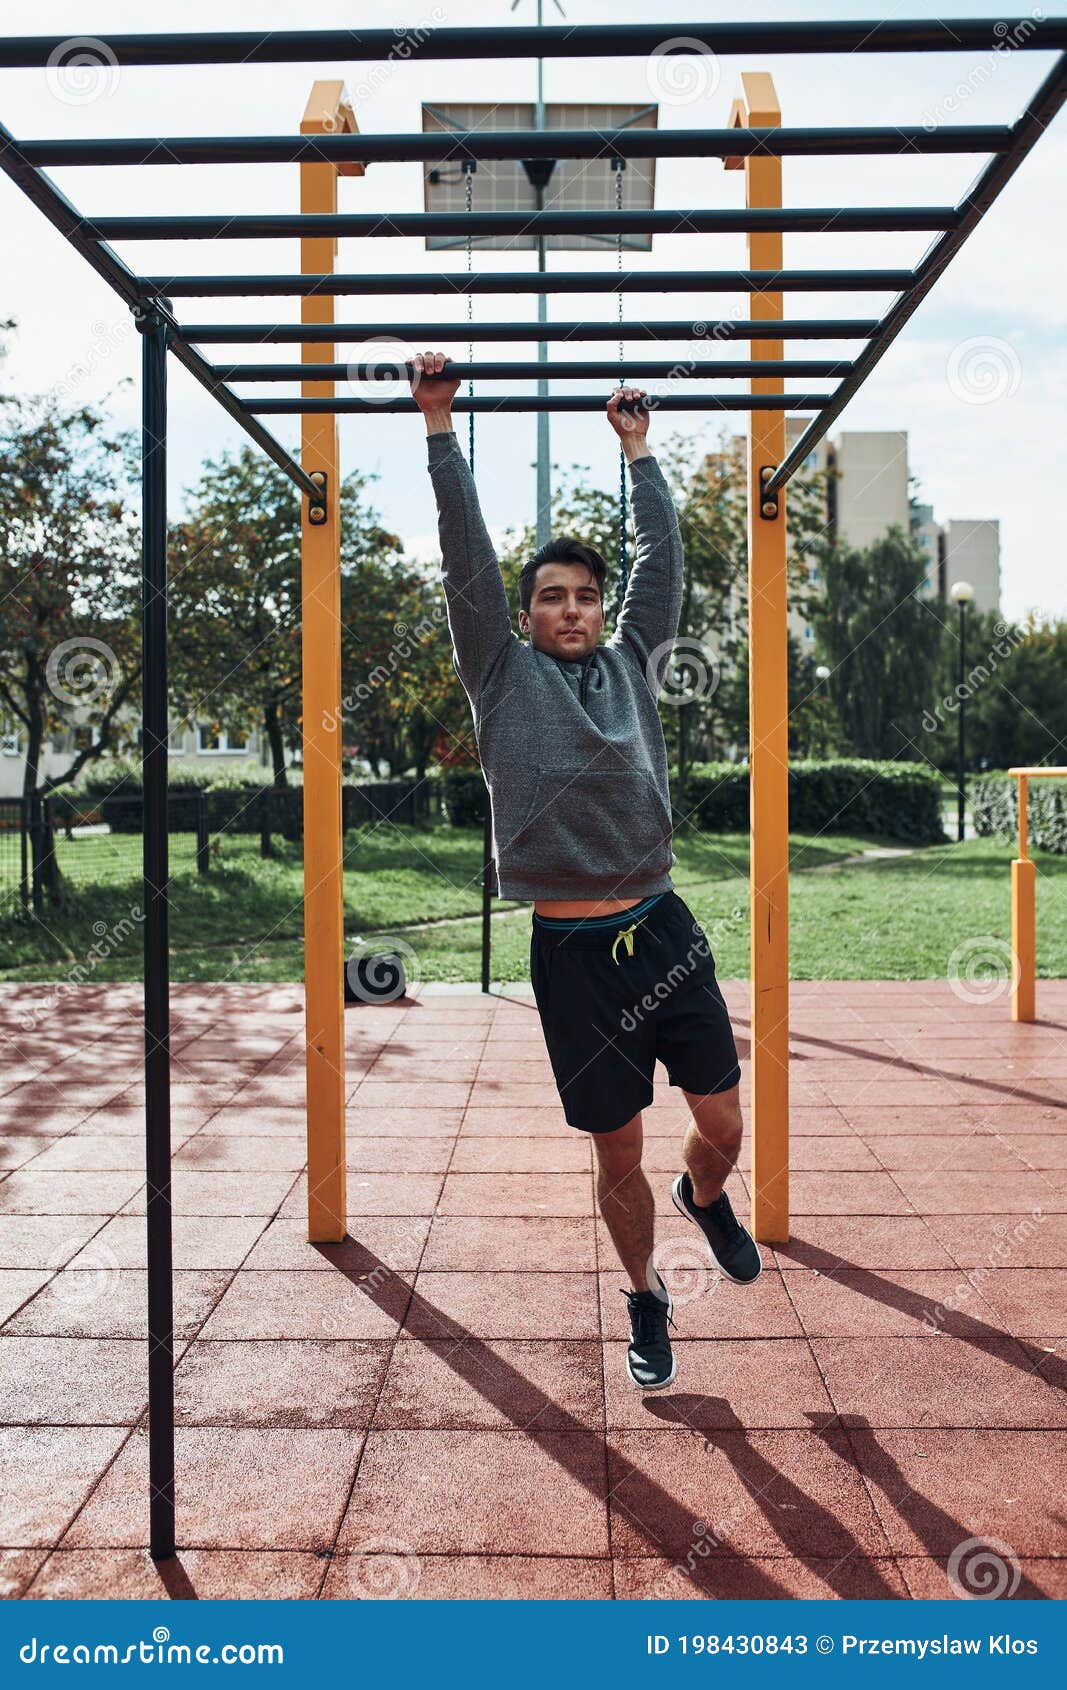 5 Day What do monkey bars workout for Build Muscle